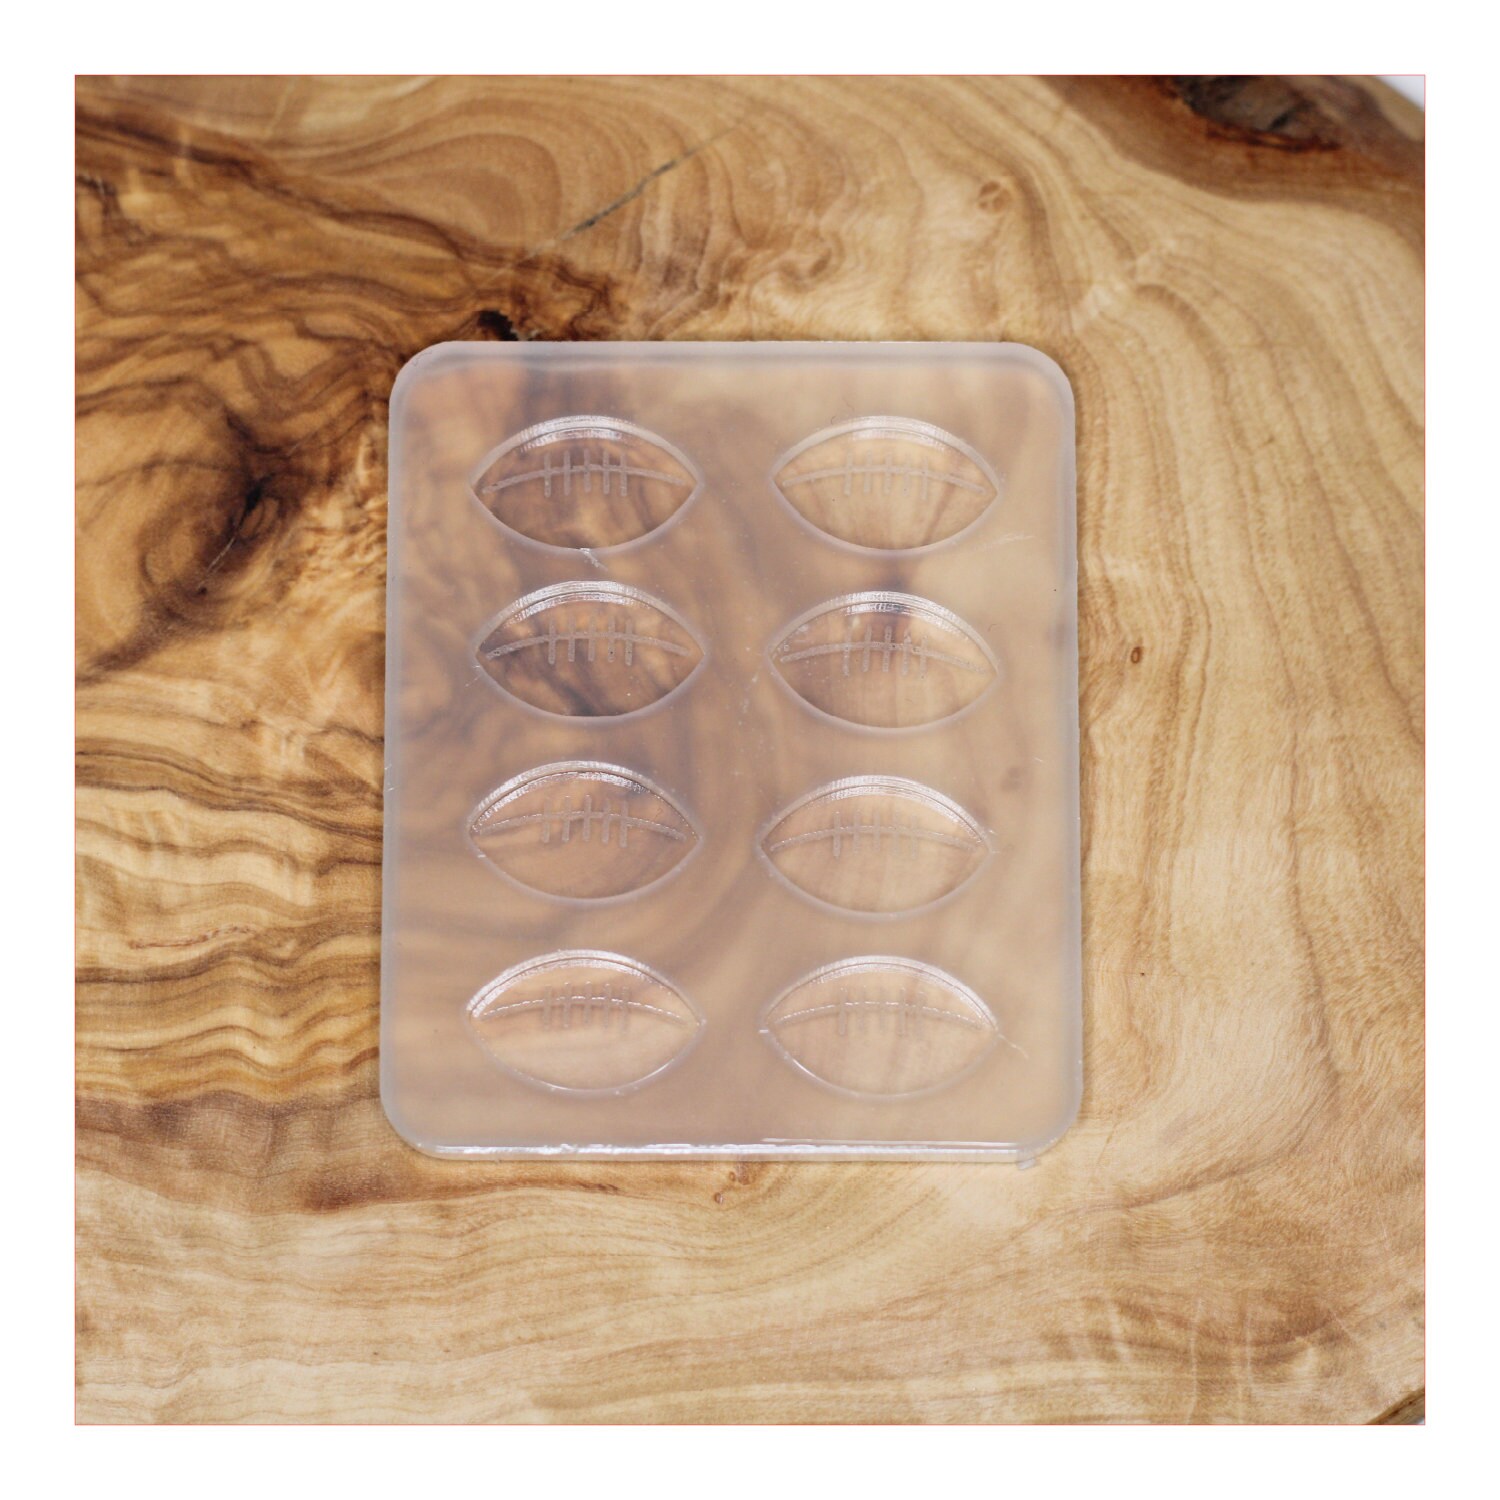 Premium Football Shape Rugby Silicone Ice Cube Mold & Candy Mold